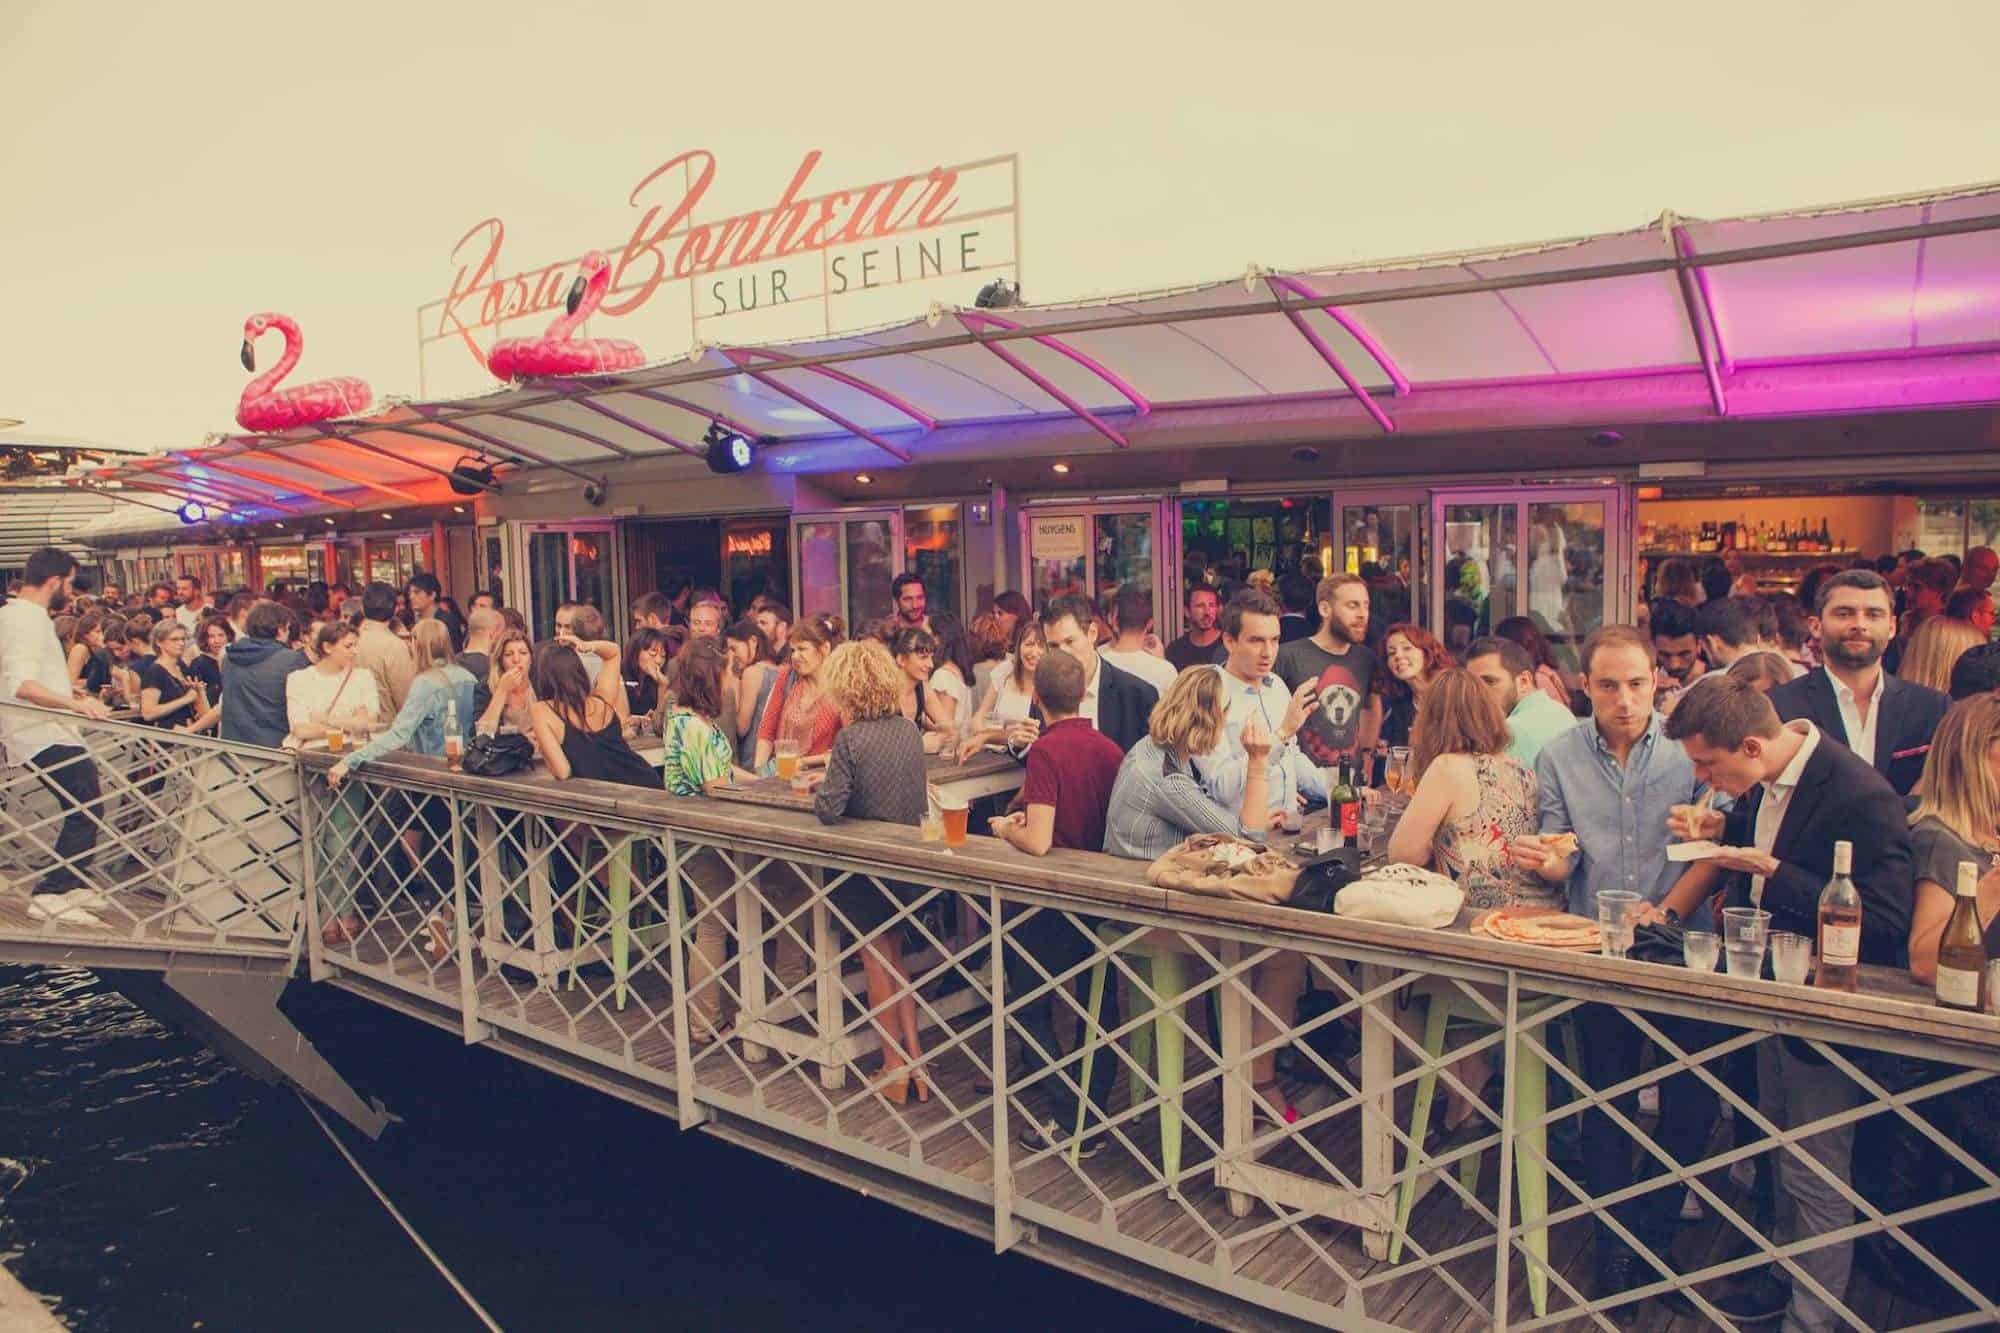 The Rosa Bonheur boat is a bar on the River Seine in Paris, which is usually heaving with locals who come for the cocktails and the atmosphere.